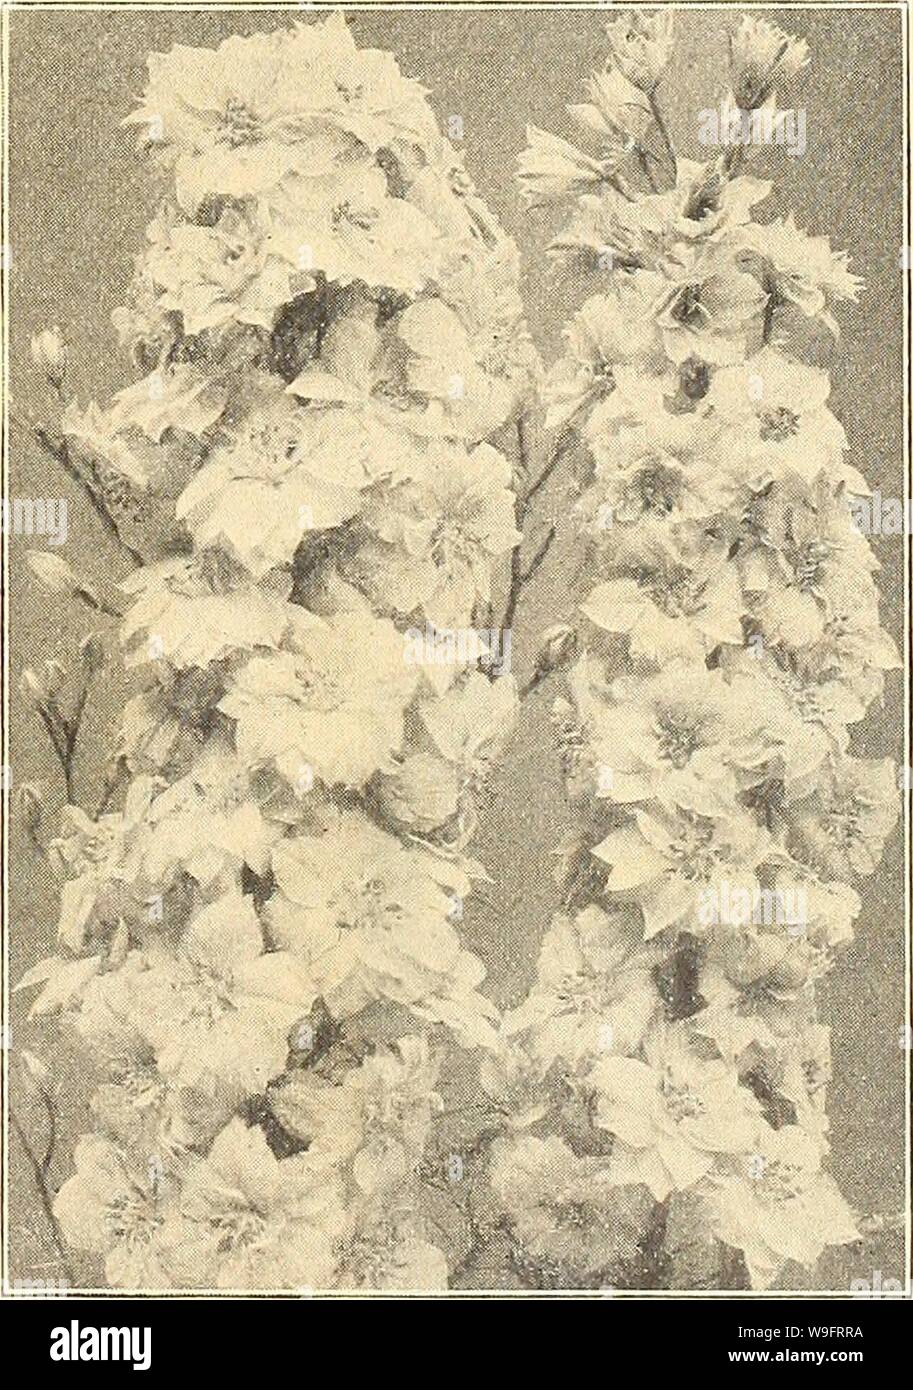 Archive image from page 66 of Currie's farm & garden annual. Currie's farm & garden annual : spring 1922 47th year  curriesfarmgarde19curr 5 Year: 1922 ( Lobelia Tenuior. Perennial Larkspur. LARKSPUR. Annual Varieties. A beautiful and well-known class of hardy annuals, producing long spikes of varied-hued blossoms. Sow in the open ground in April or May. Pkt. Emperor—A profuse bloomer, very double, mixed colors. 1 foot. V4, oz. 25c 5 Stock Flowered—Tall Double White, Dark Blue. Rose and Flesh. Each 5c. Tall Mixed, double. 2 feet; 14 oz. 25c 5 Double Tall Rocket—Fine mixed;  oz. 15e 5 Double Dw Stock Photo